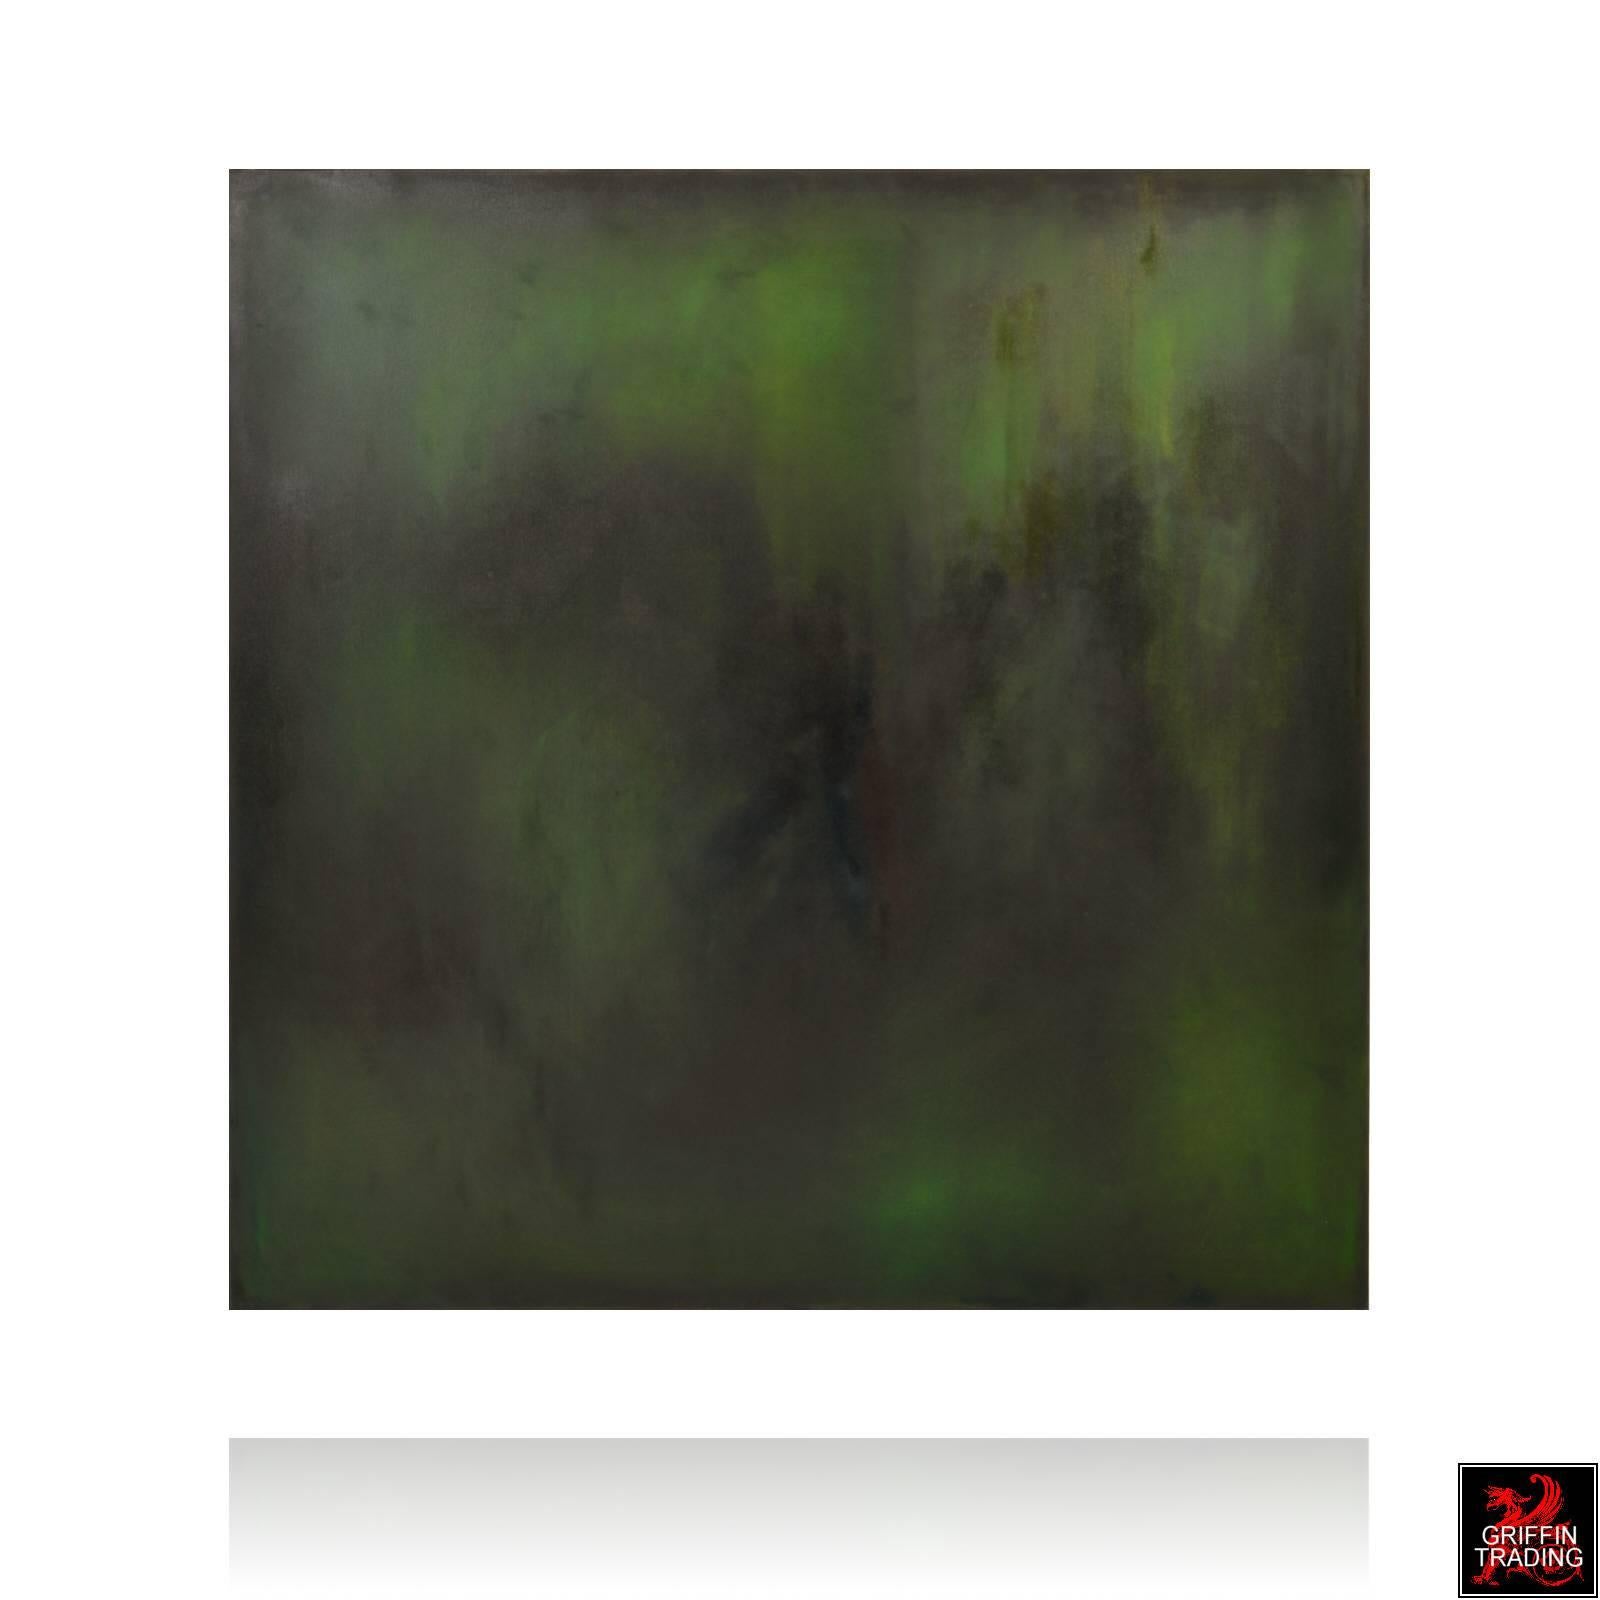 The deep and shadowy green tones of this abstract painting create a stirring feeling when viewed in person. It nebulous appearance reminds us of the northern lights in the evening skies. This is an original painting on a gallery wrapped canvas by